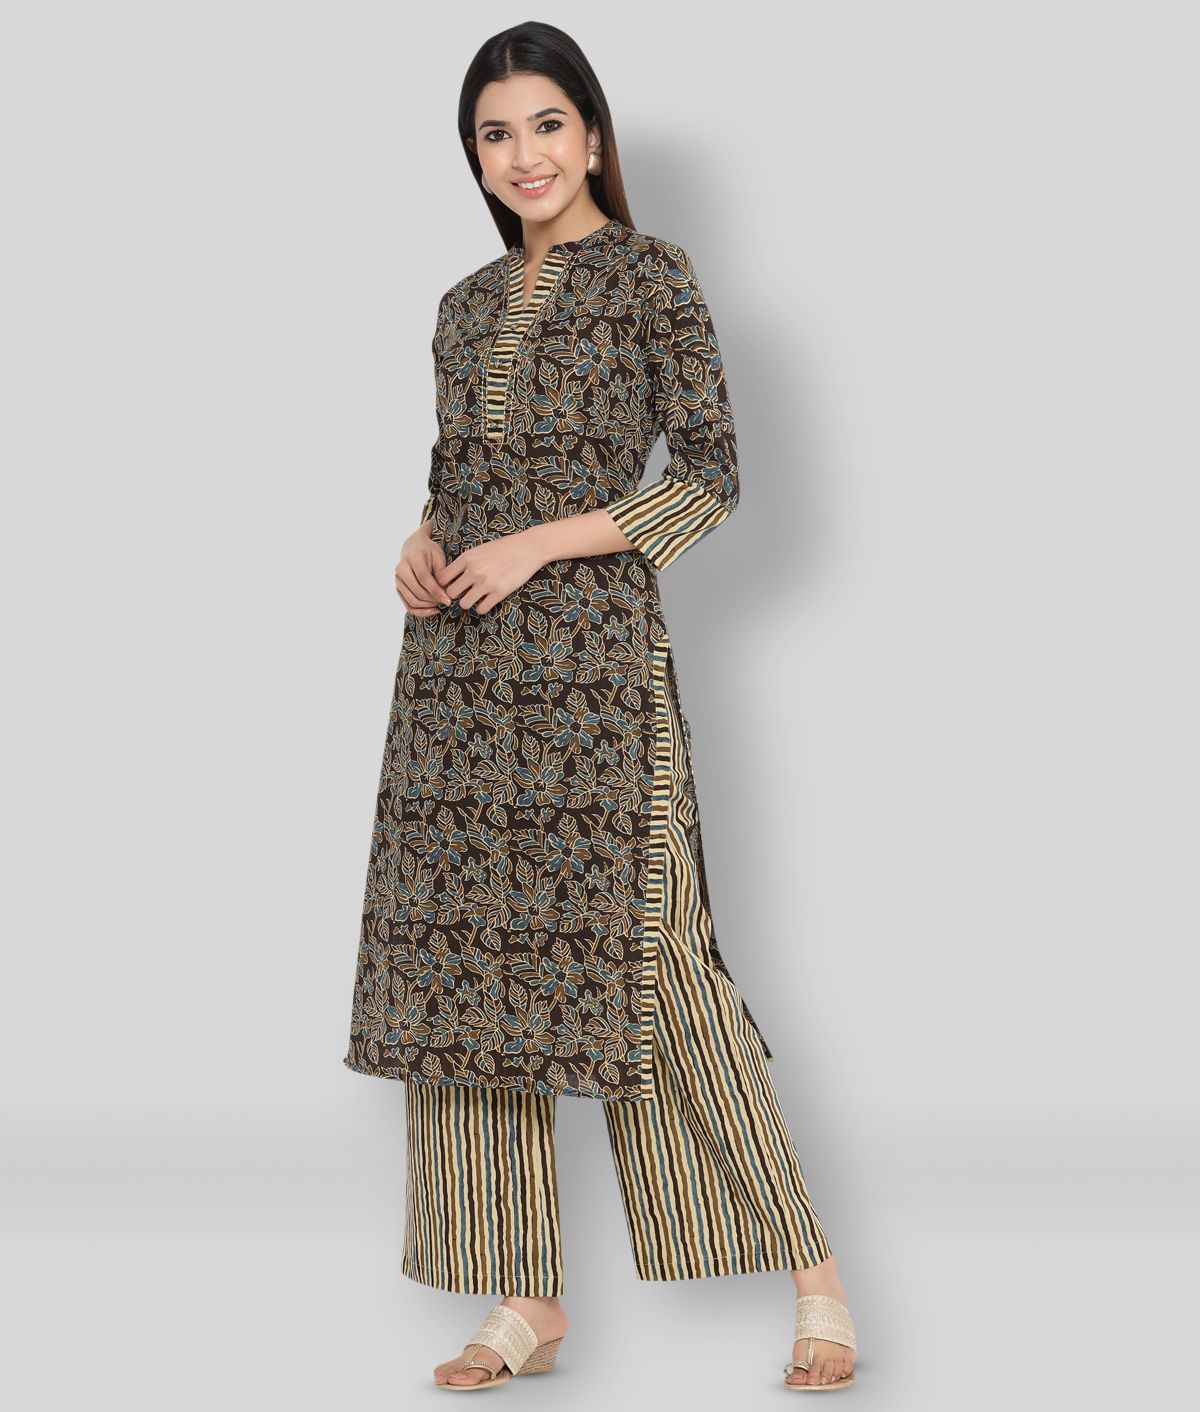     			KIPEK - Green Straight Cotton Women's Stitched Salwar Suit ( Pack of 1 )